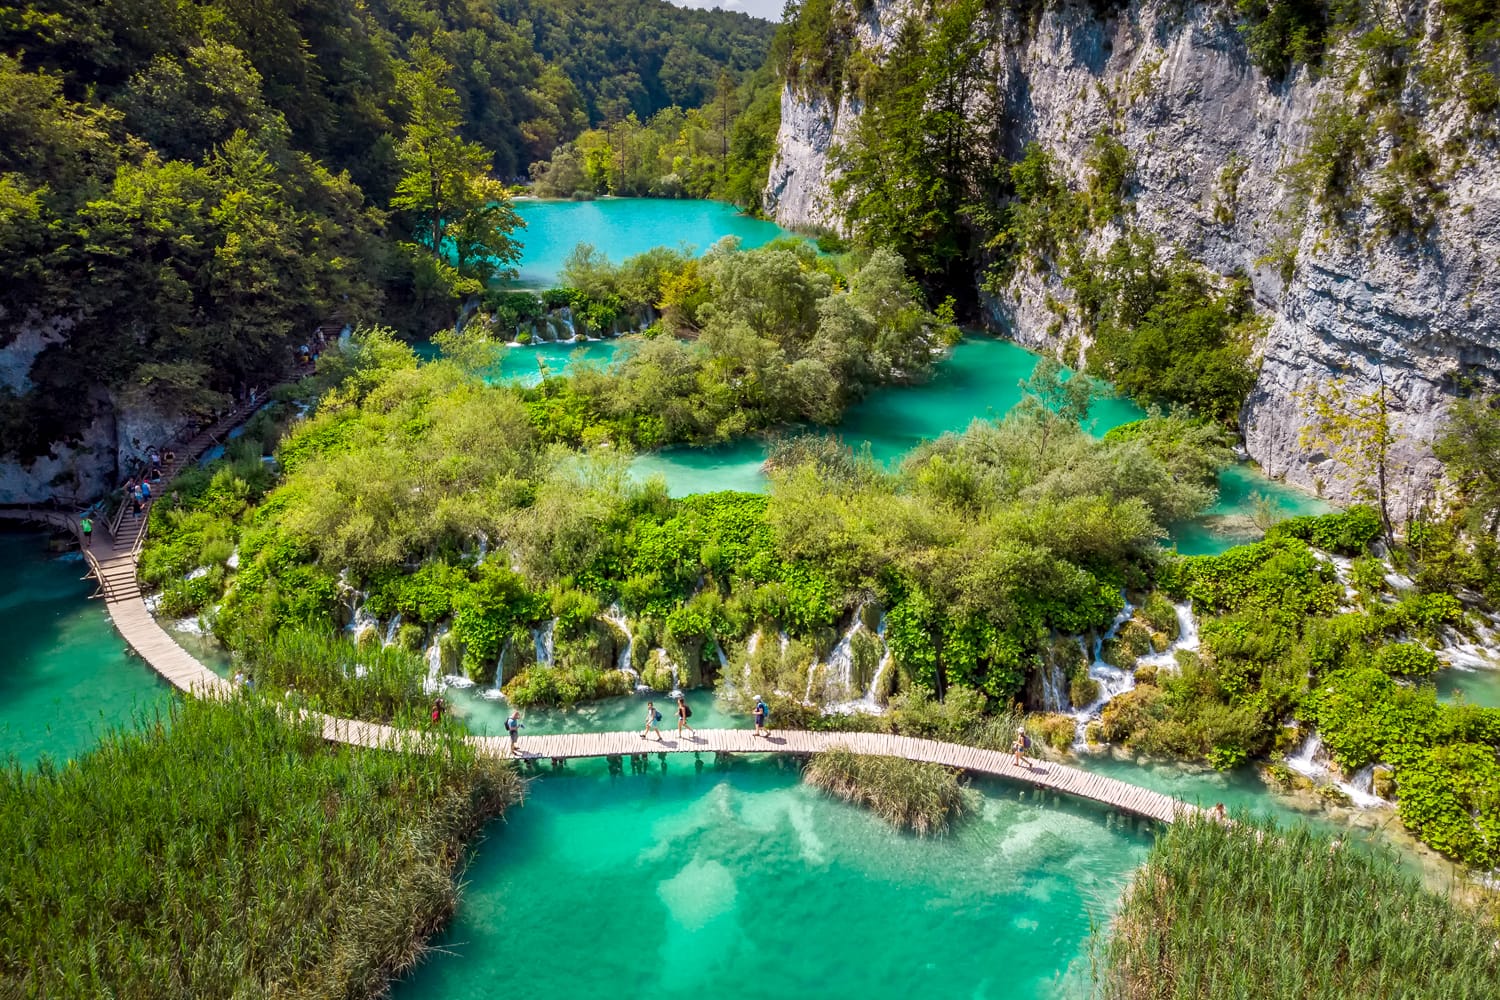 Several waterfalls of one of the most astonishing Plitvice Lakes, Croatia.